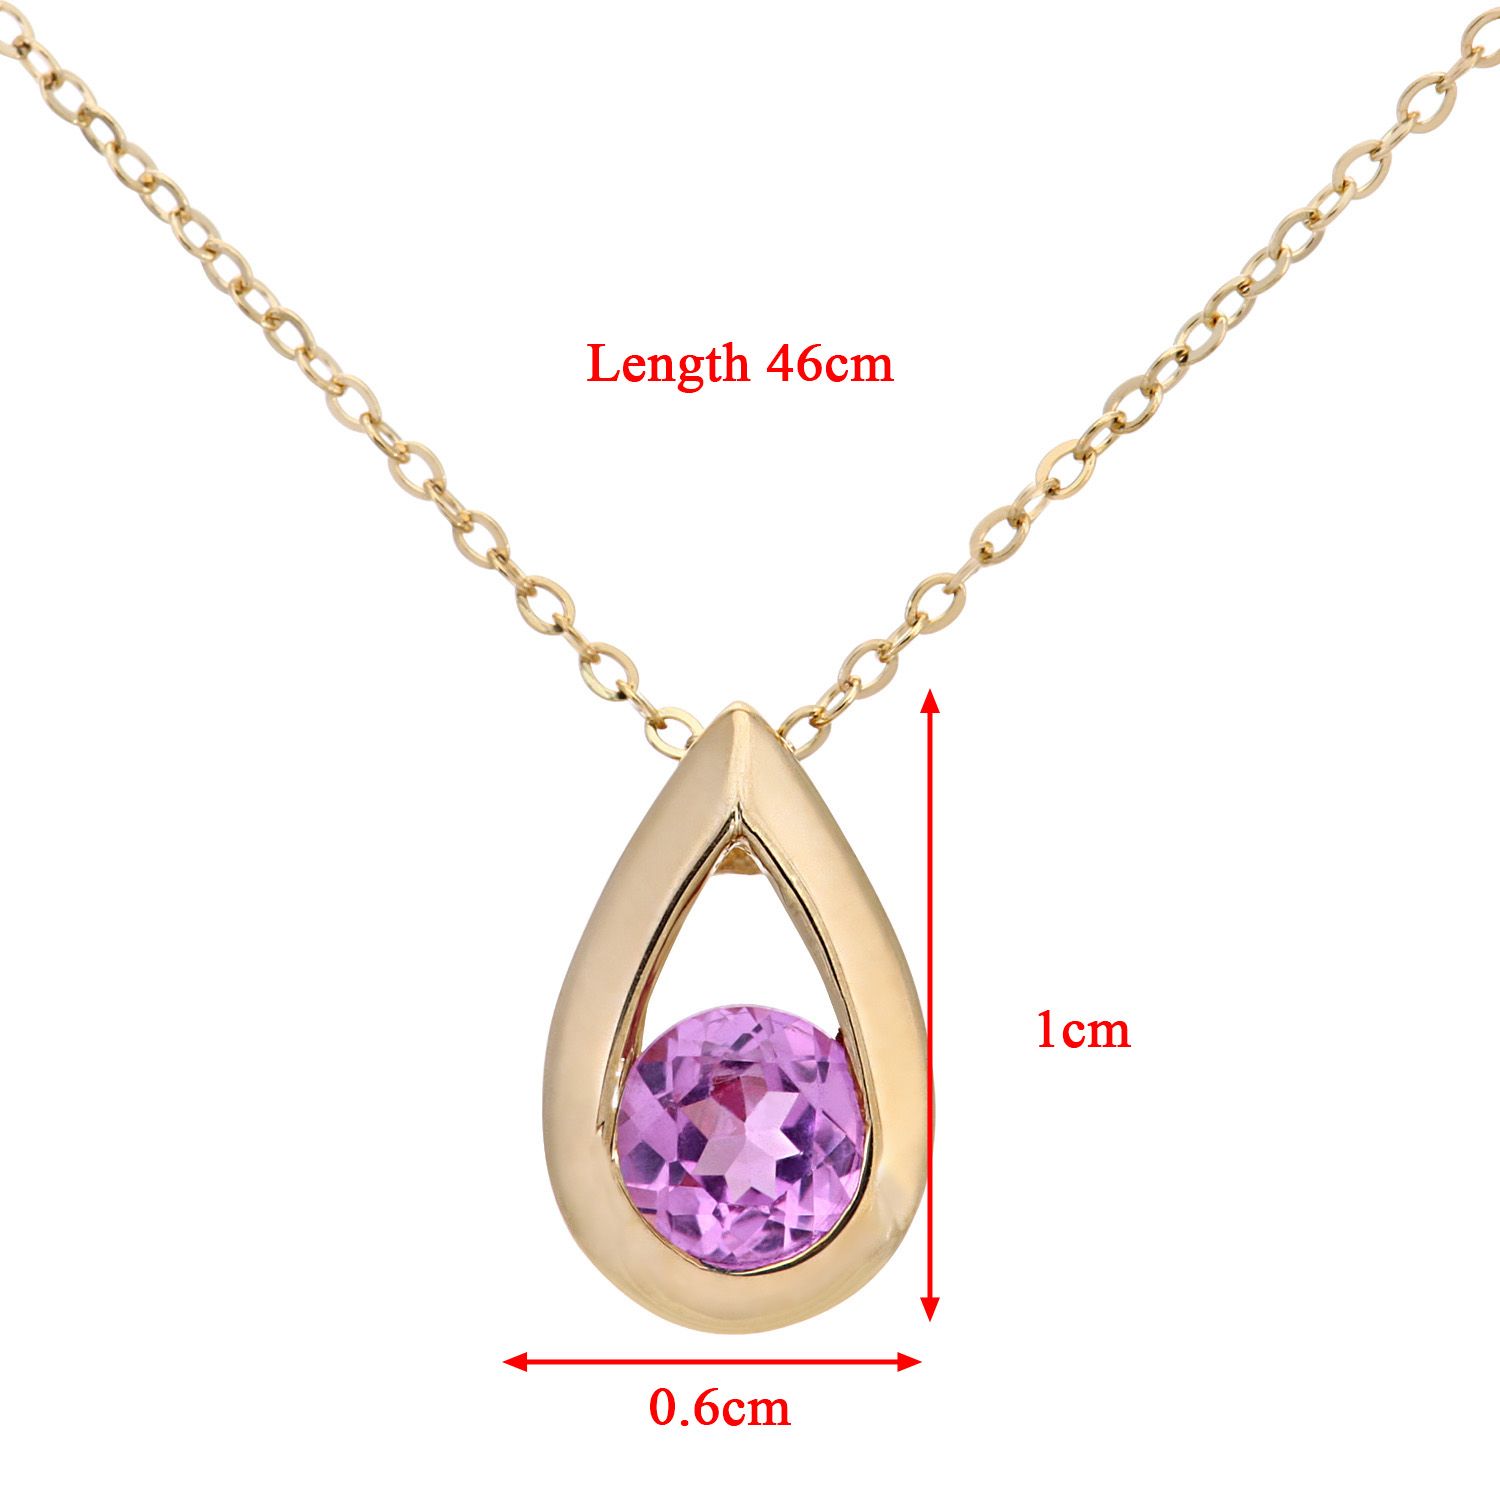 # 9K (375) Yellow Gold: 0.96gr; # Created Pink Sapphire: 0.2ct